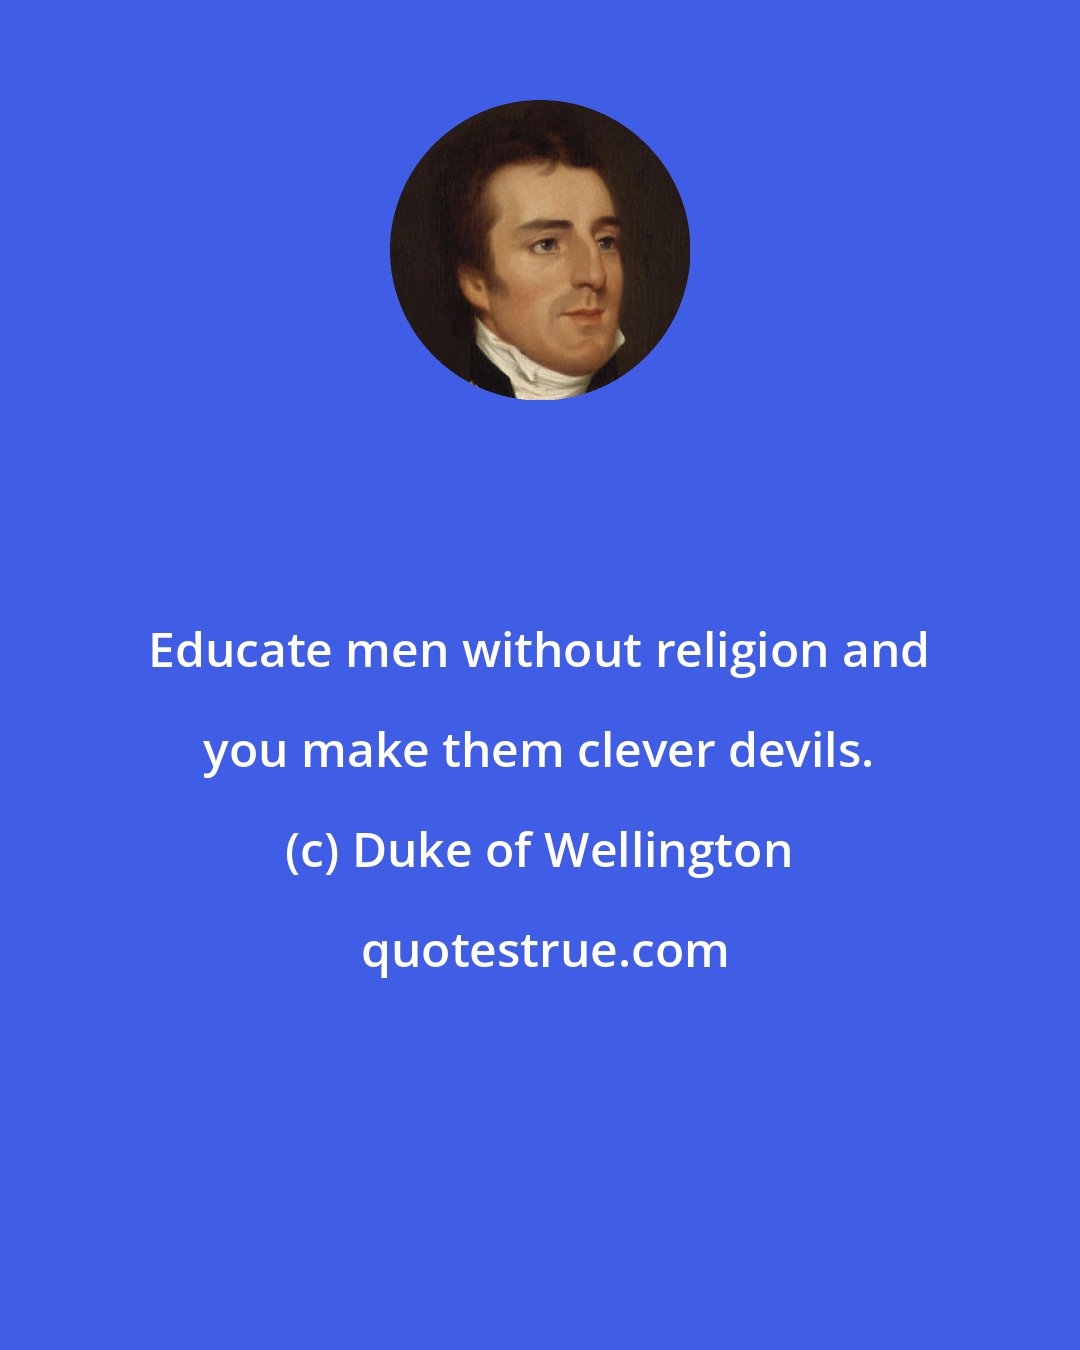 Duke of Wellington: Educate men without religion and you make them clever devils.